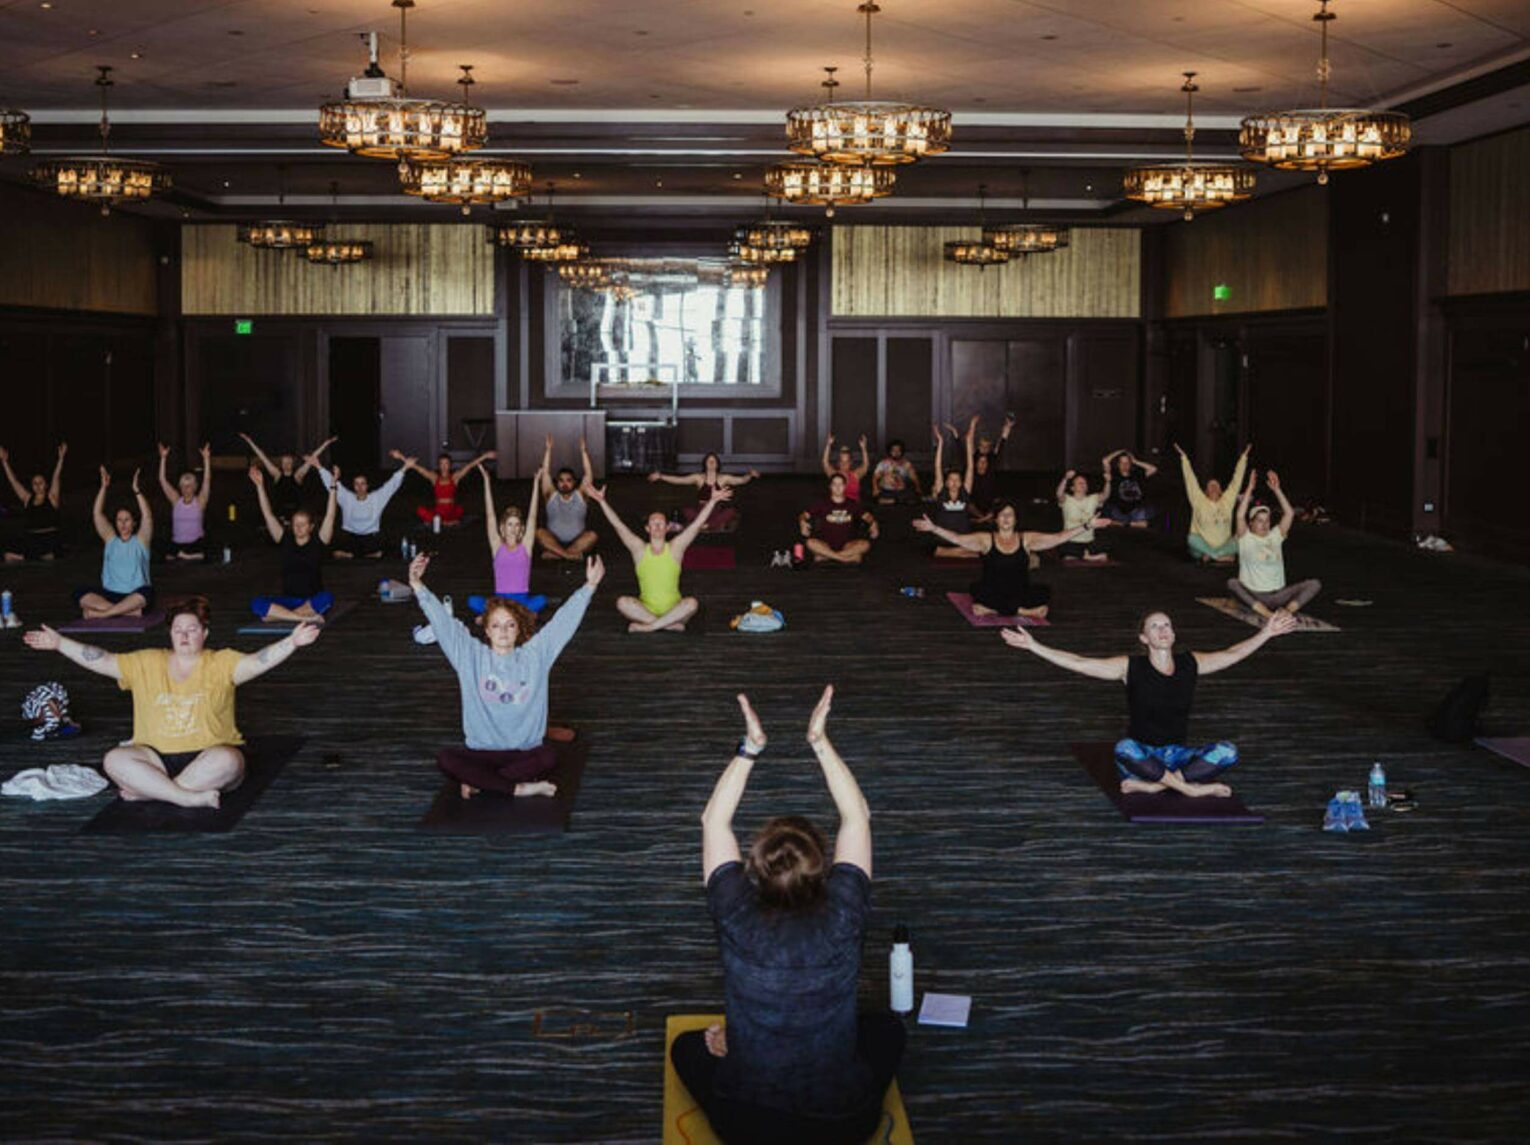 Attendees at Swiss Salutations Yoga